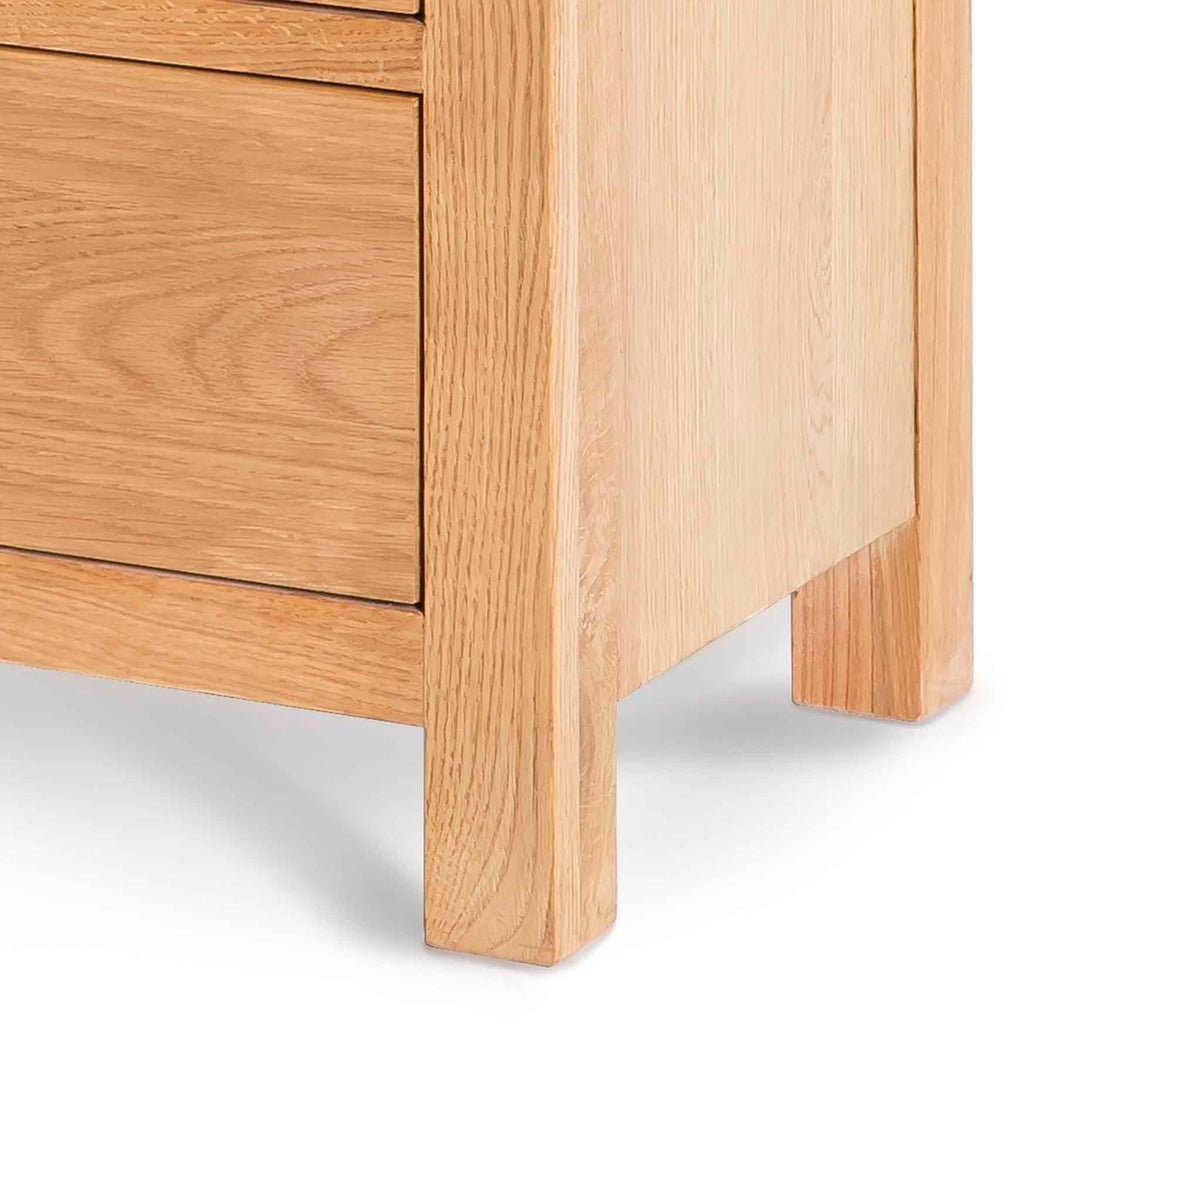 Surrey Oak Large Chest Of Drawers - Close up- of base of drawers